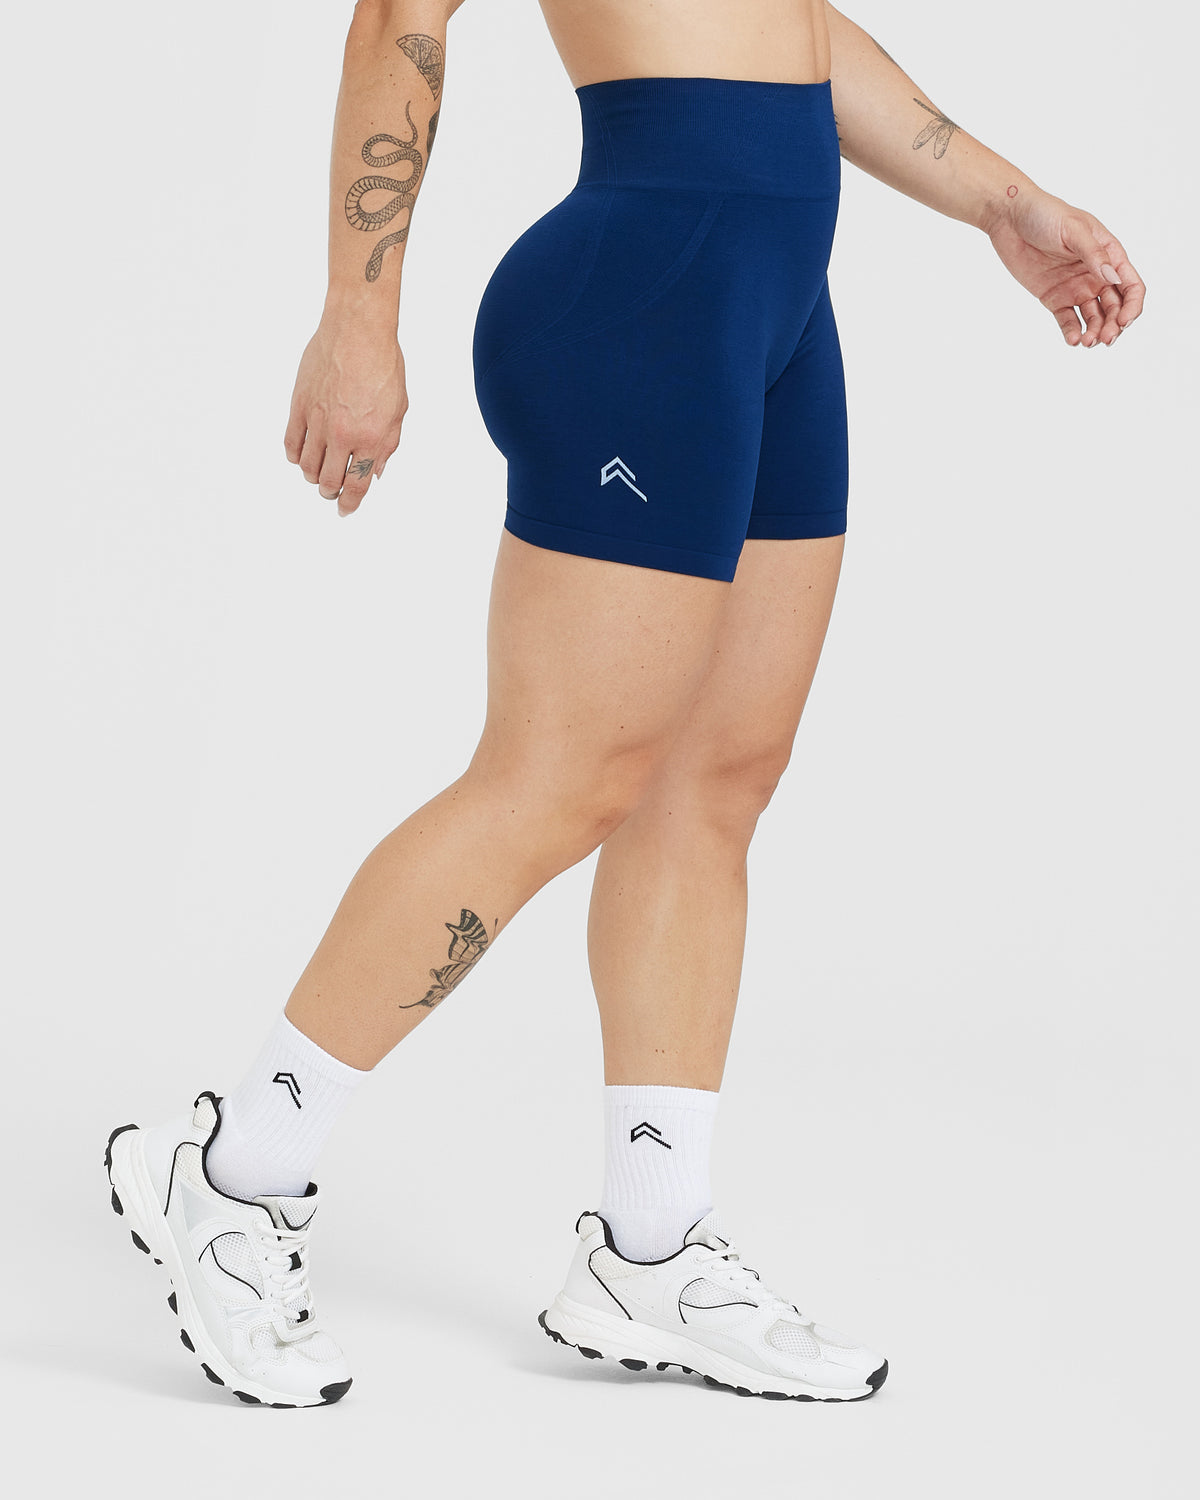 BLUE HIGH WAISTED SHORTS - WOMEN - MIDNIGHT | Oner Active US